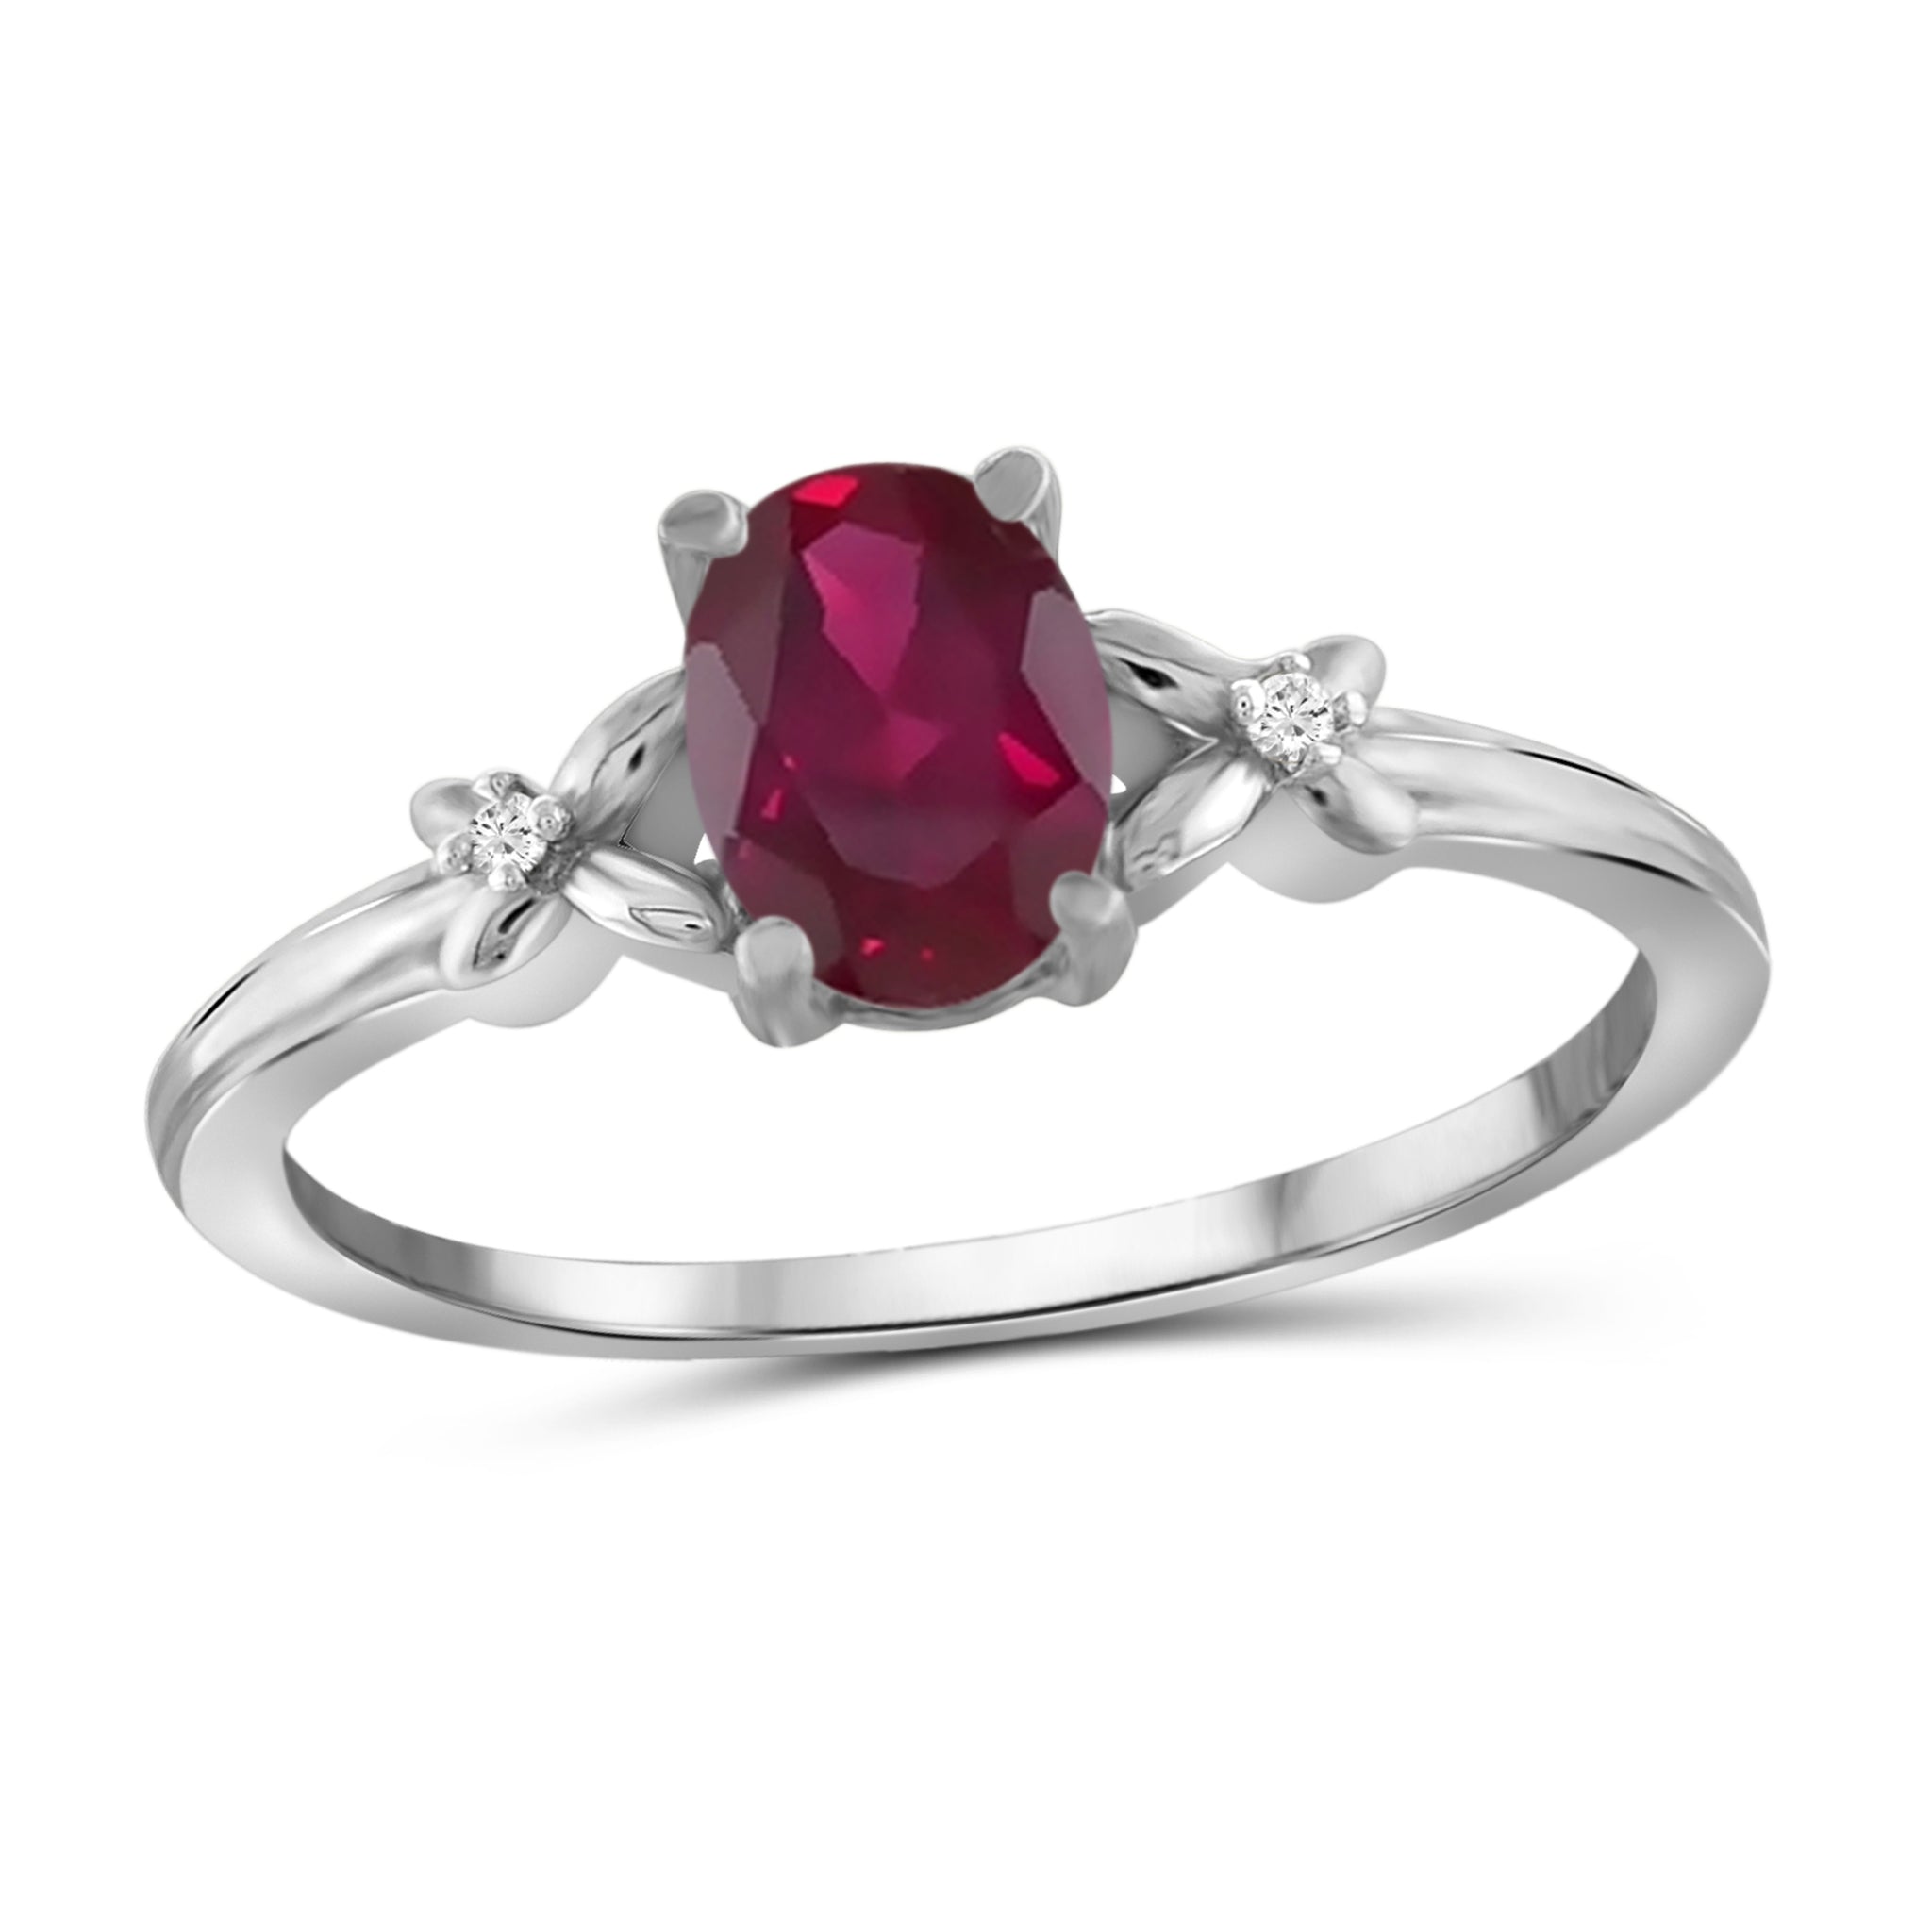 JewelonFire 0.90 Carat T.G.W. Ruby And Accent White Diamond Sterling Silver Ring - Assorted Colors